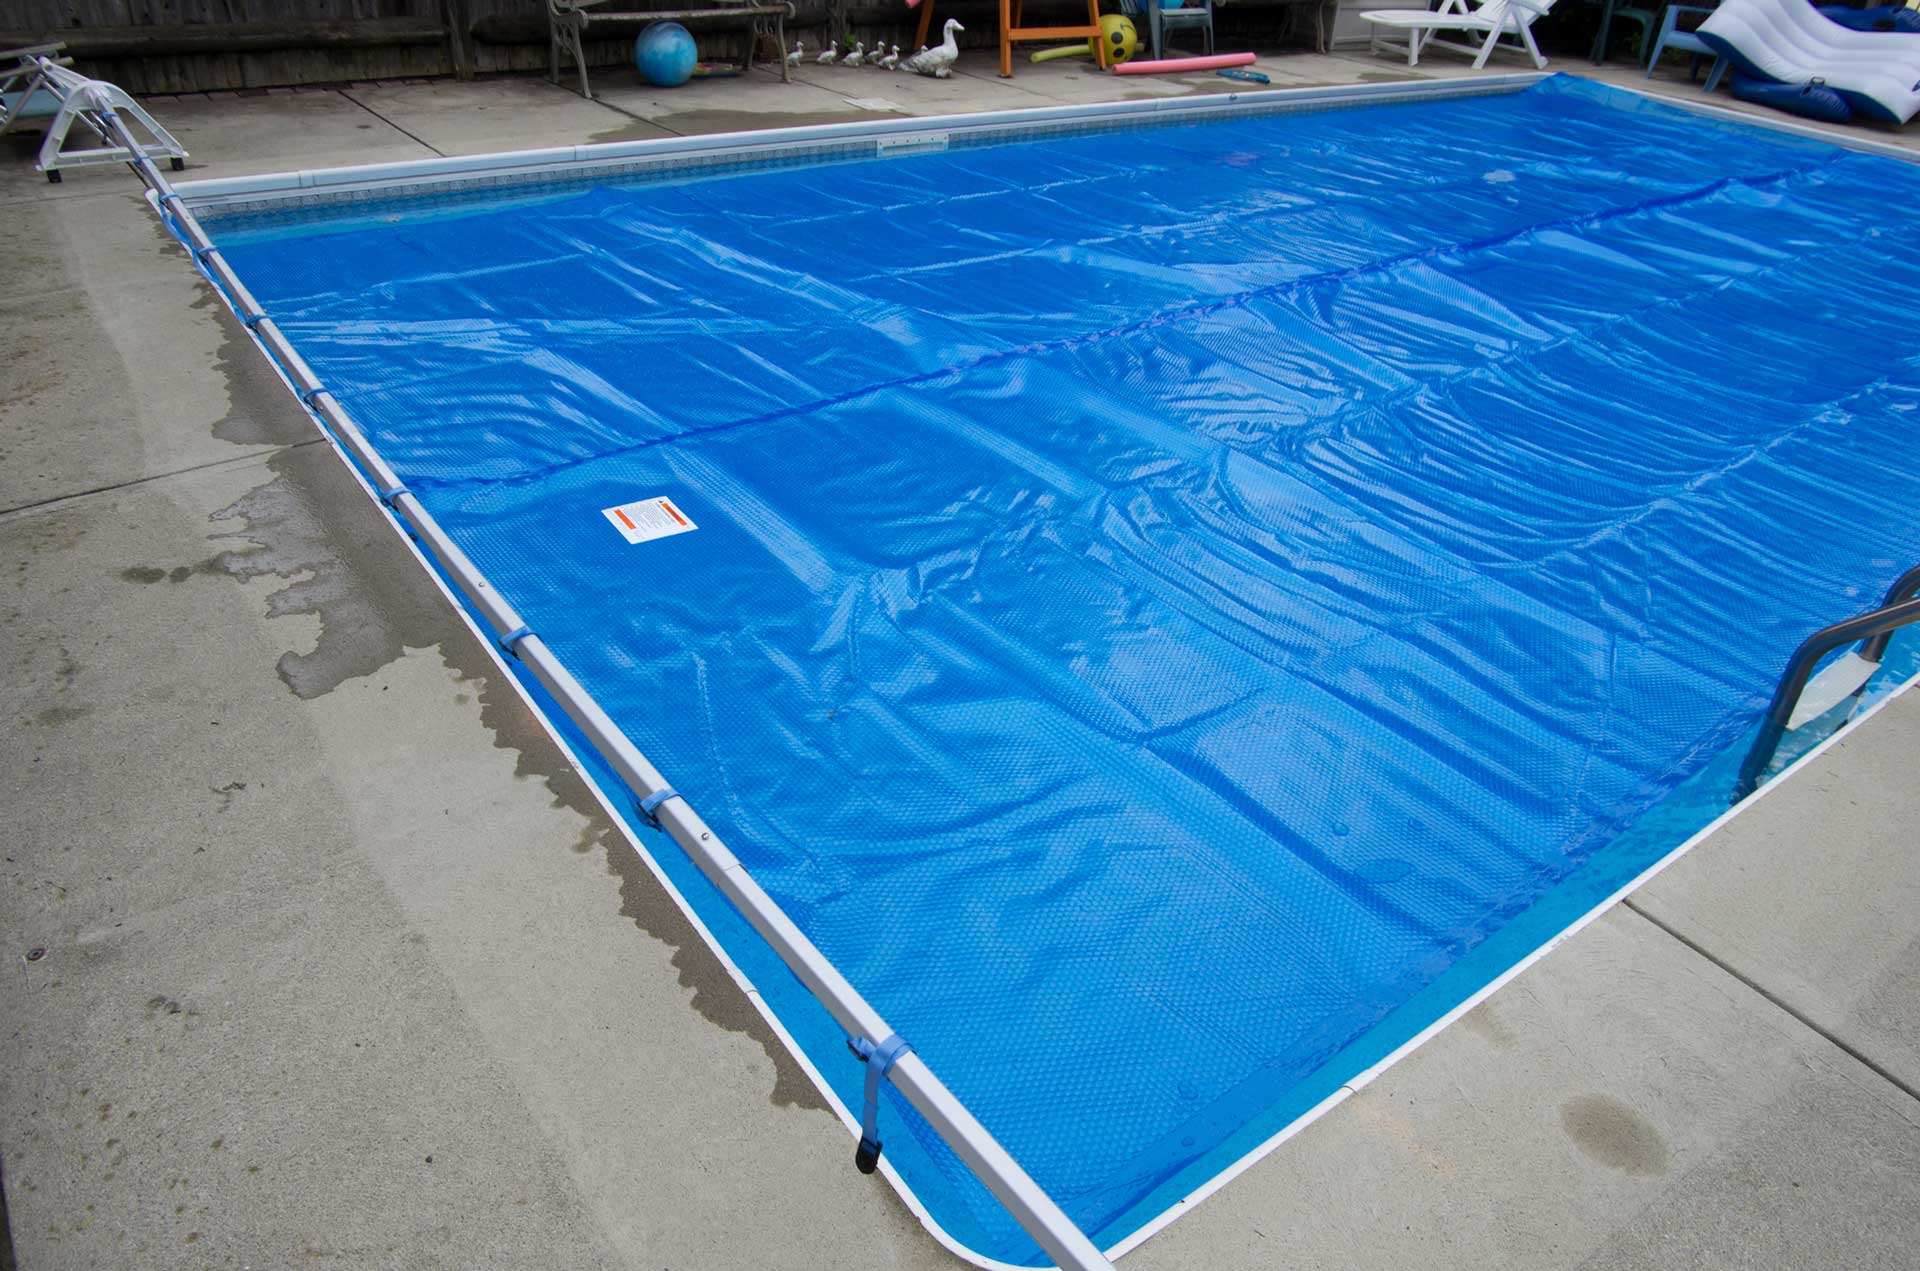 A pool cover colour blue | Penrith, NSW | Ian’s Pools Penrith